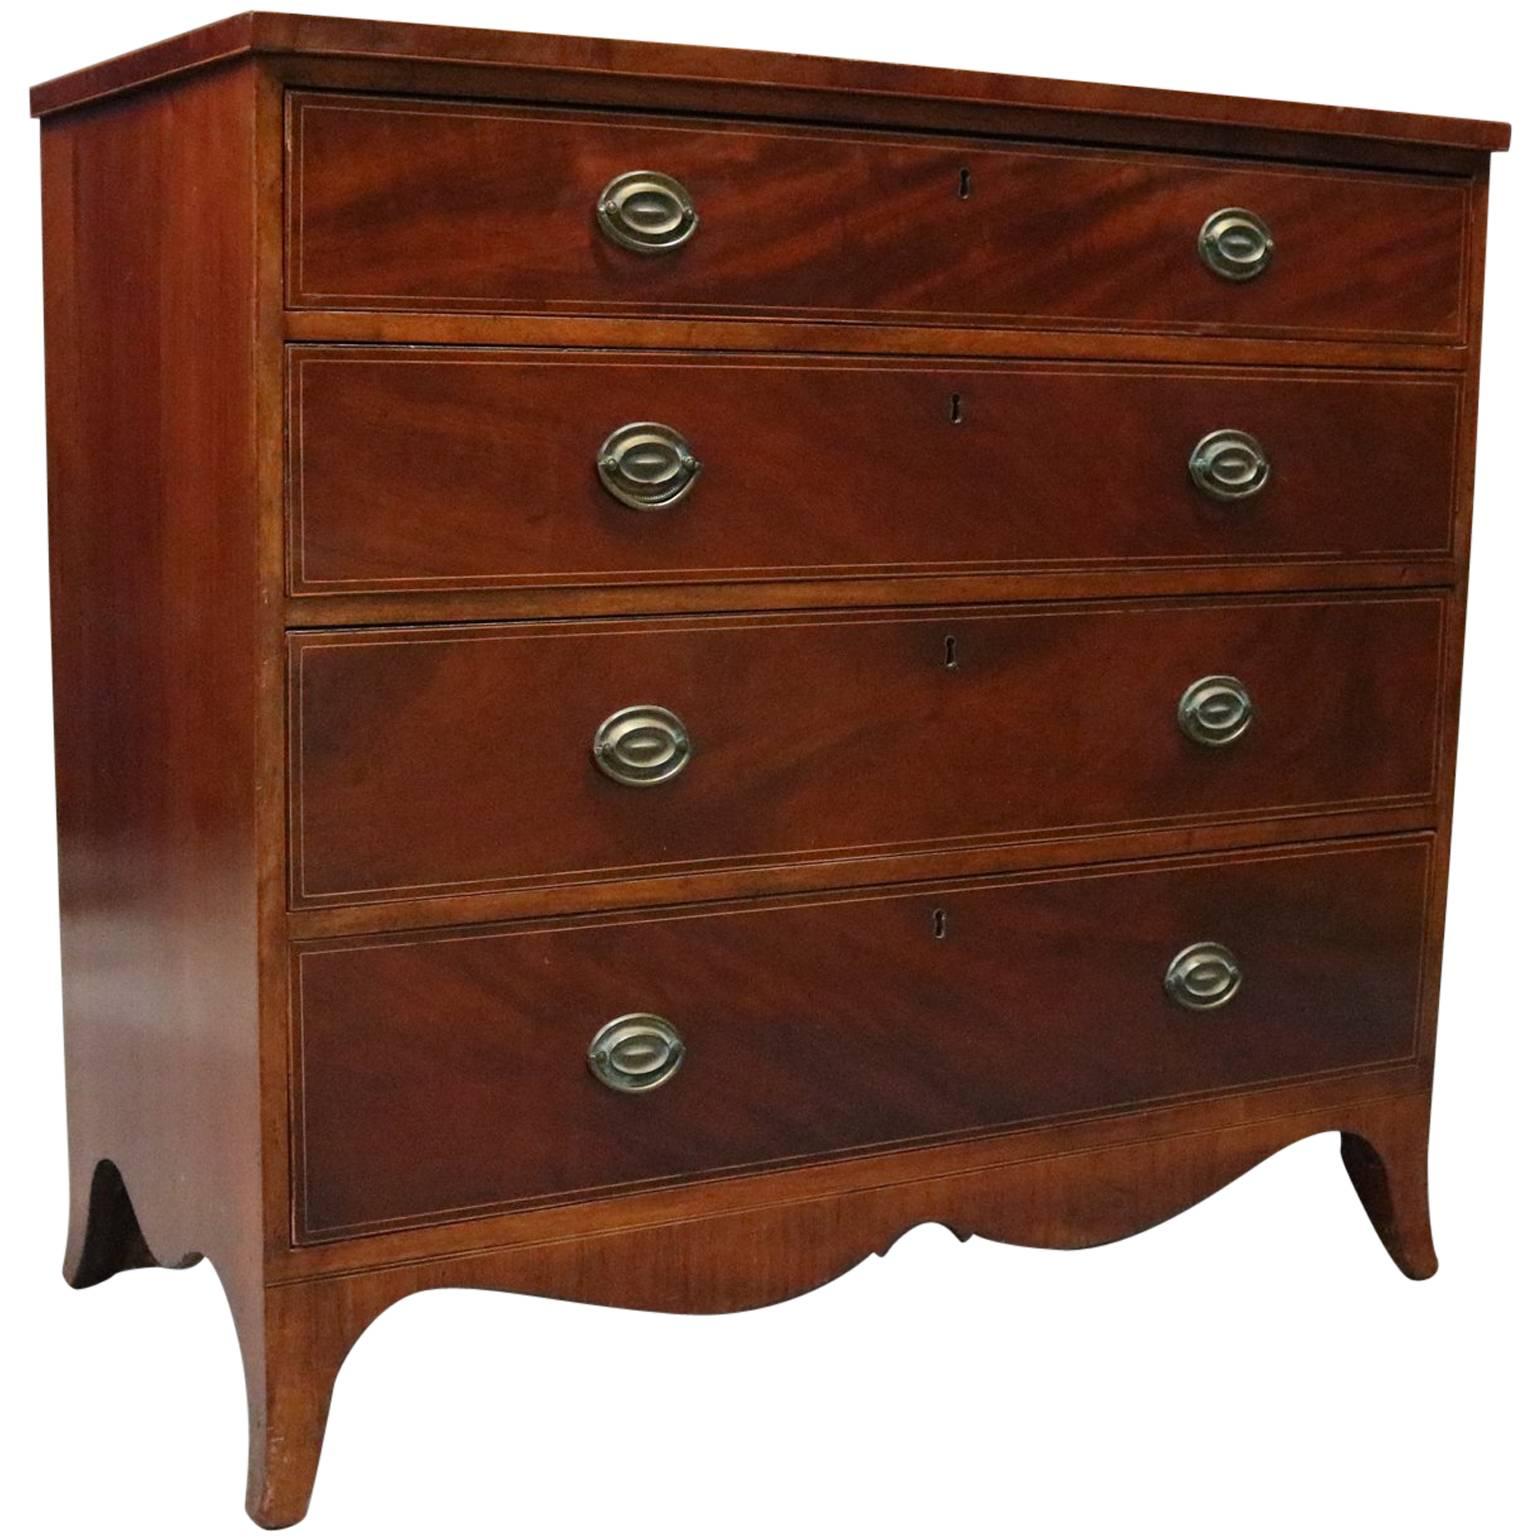 Antique English Flame Mahogany Hepplewhite Inlaid Banded Chest of Drawers